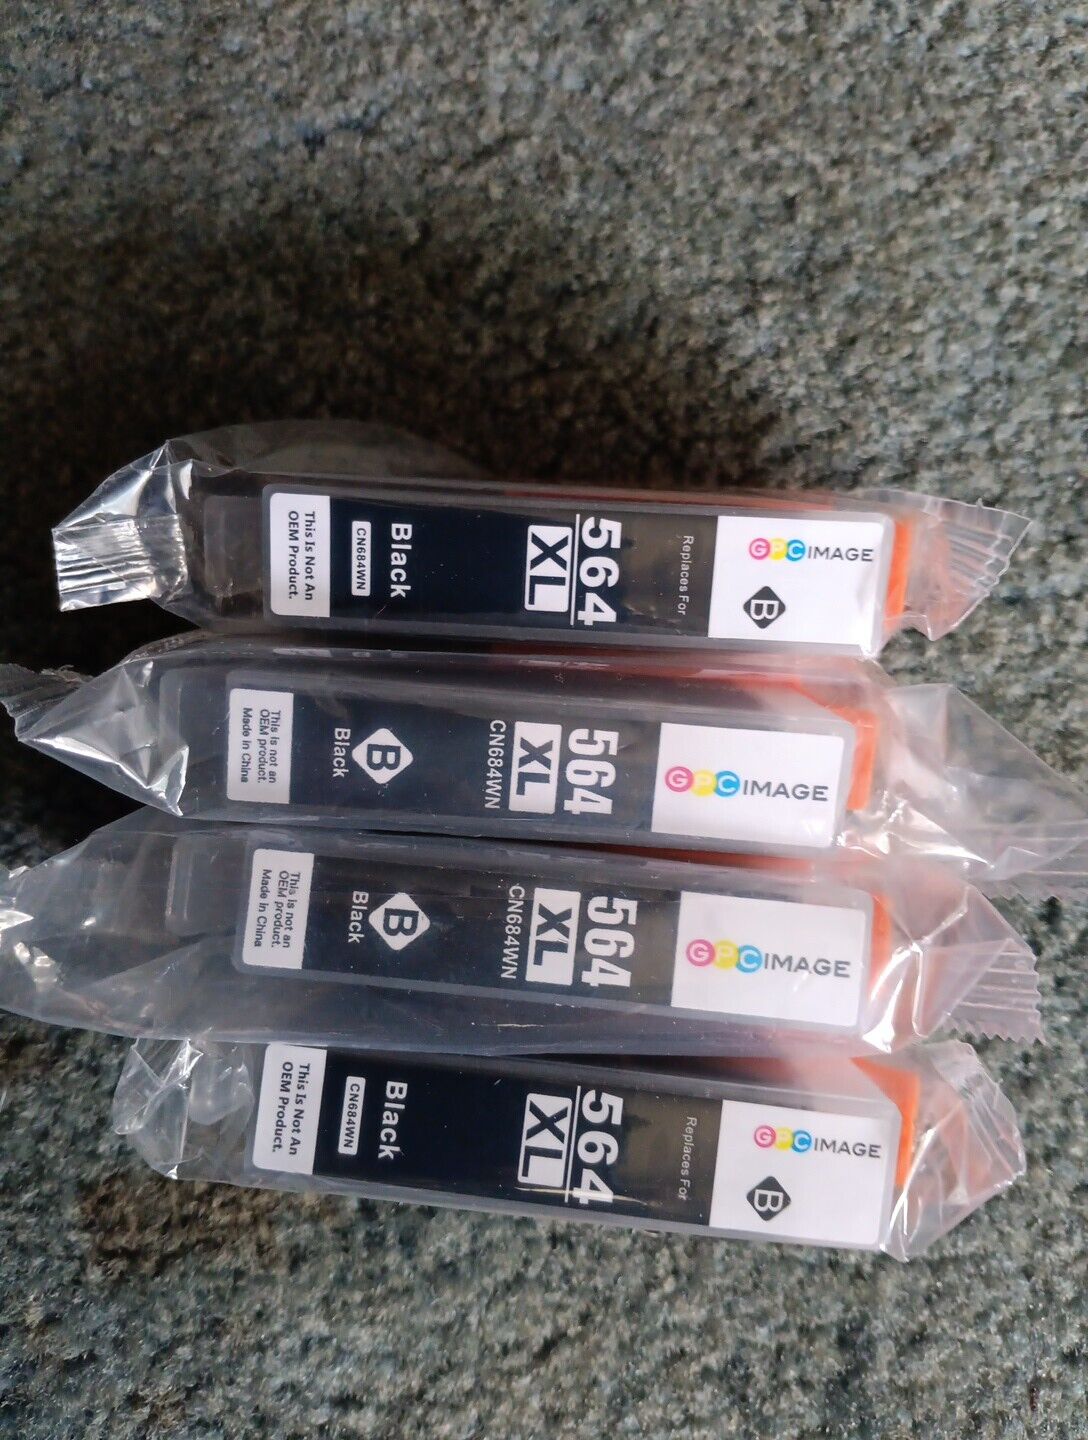 GPC Image 564XL Black Ink Cartridges Lot of 4 Sealed New in Package